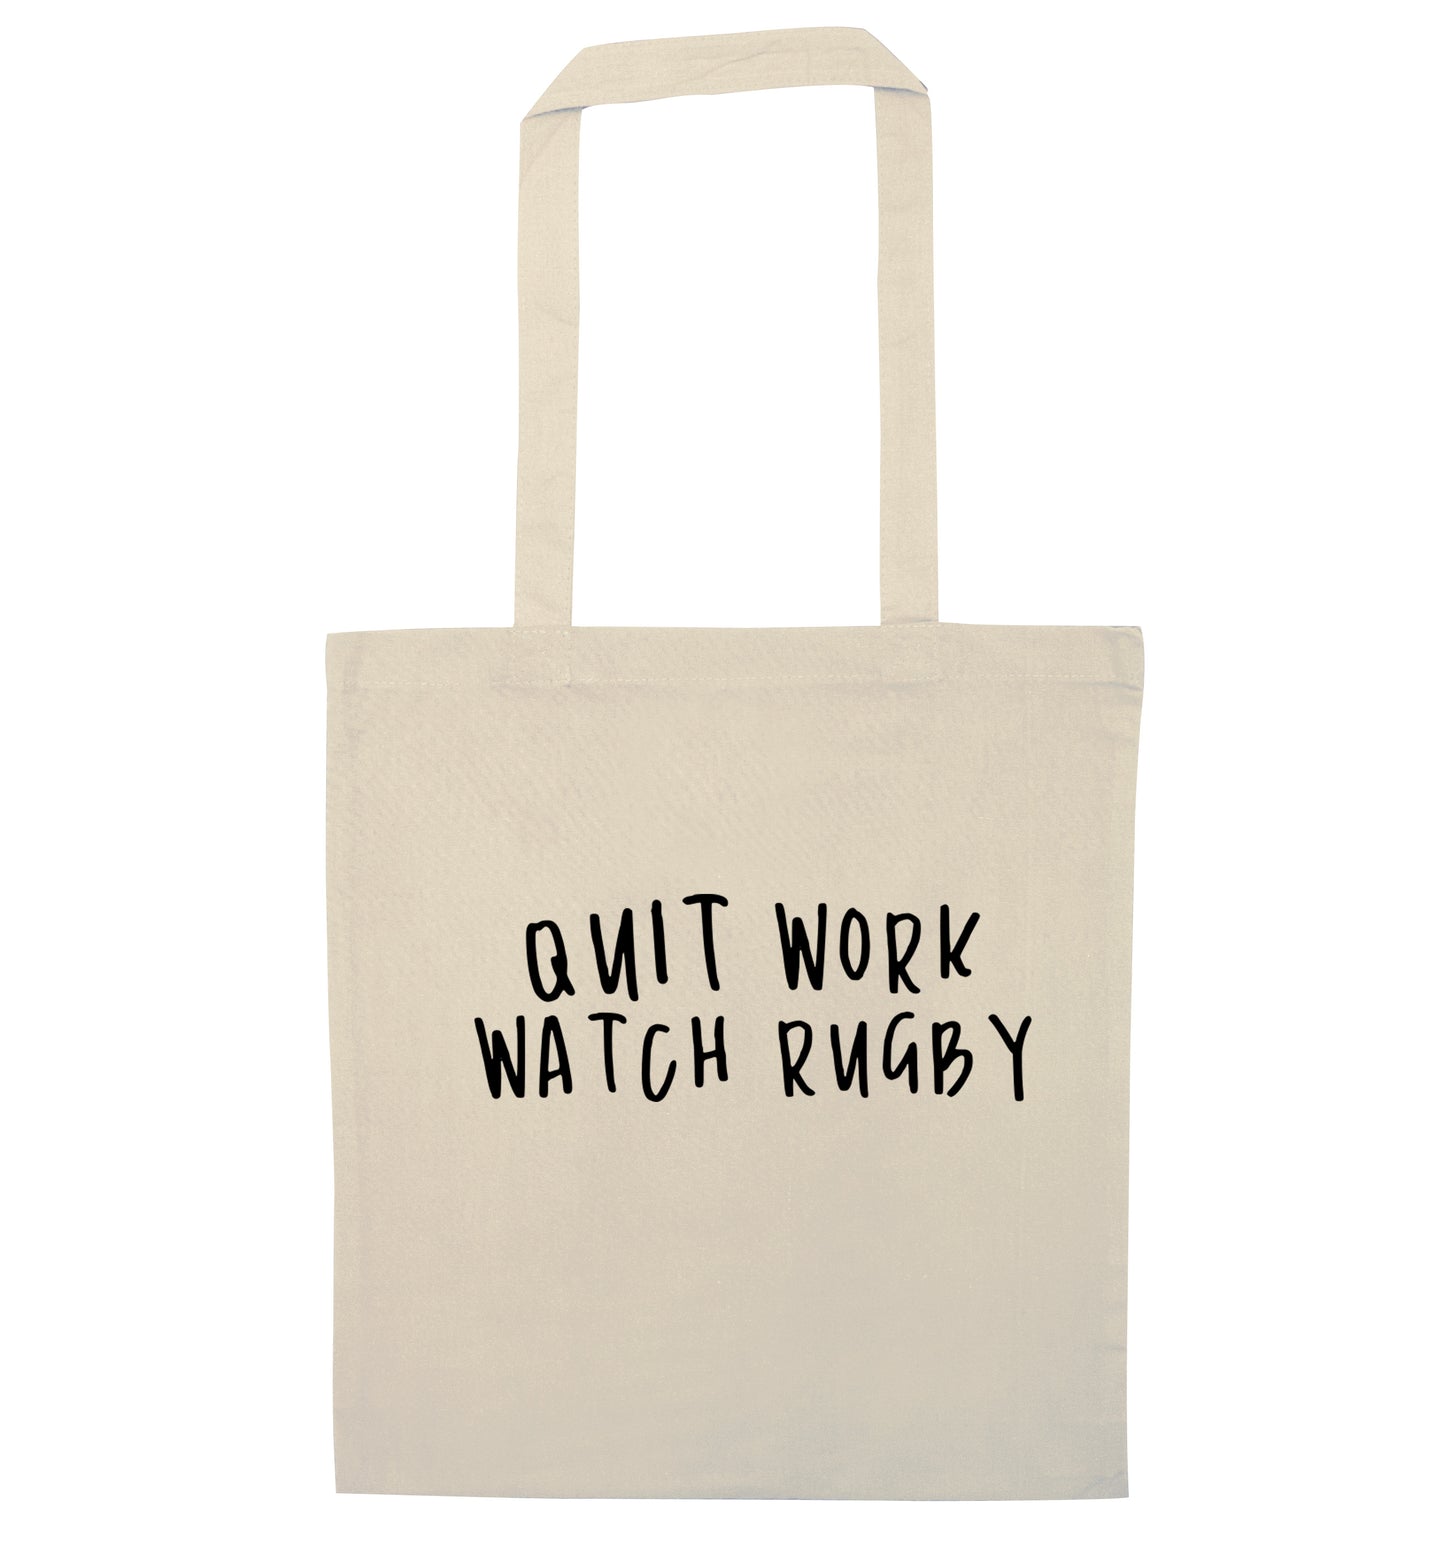 Quit work watch rugby natural tote bag